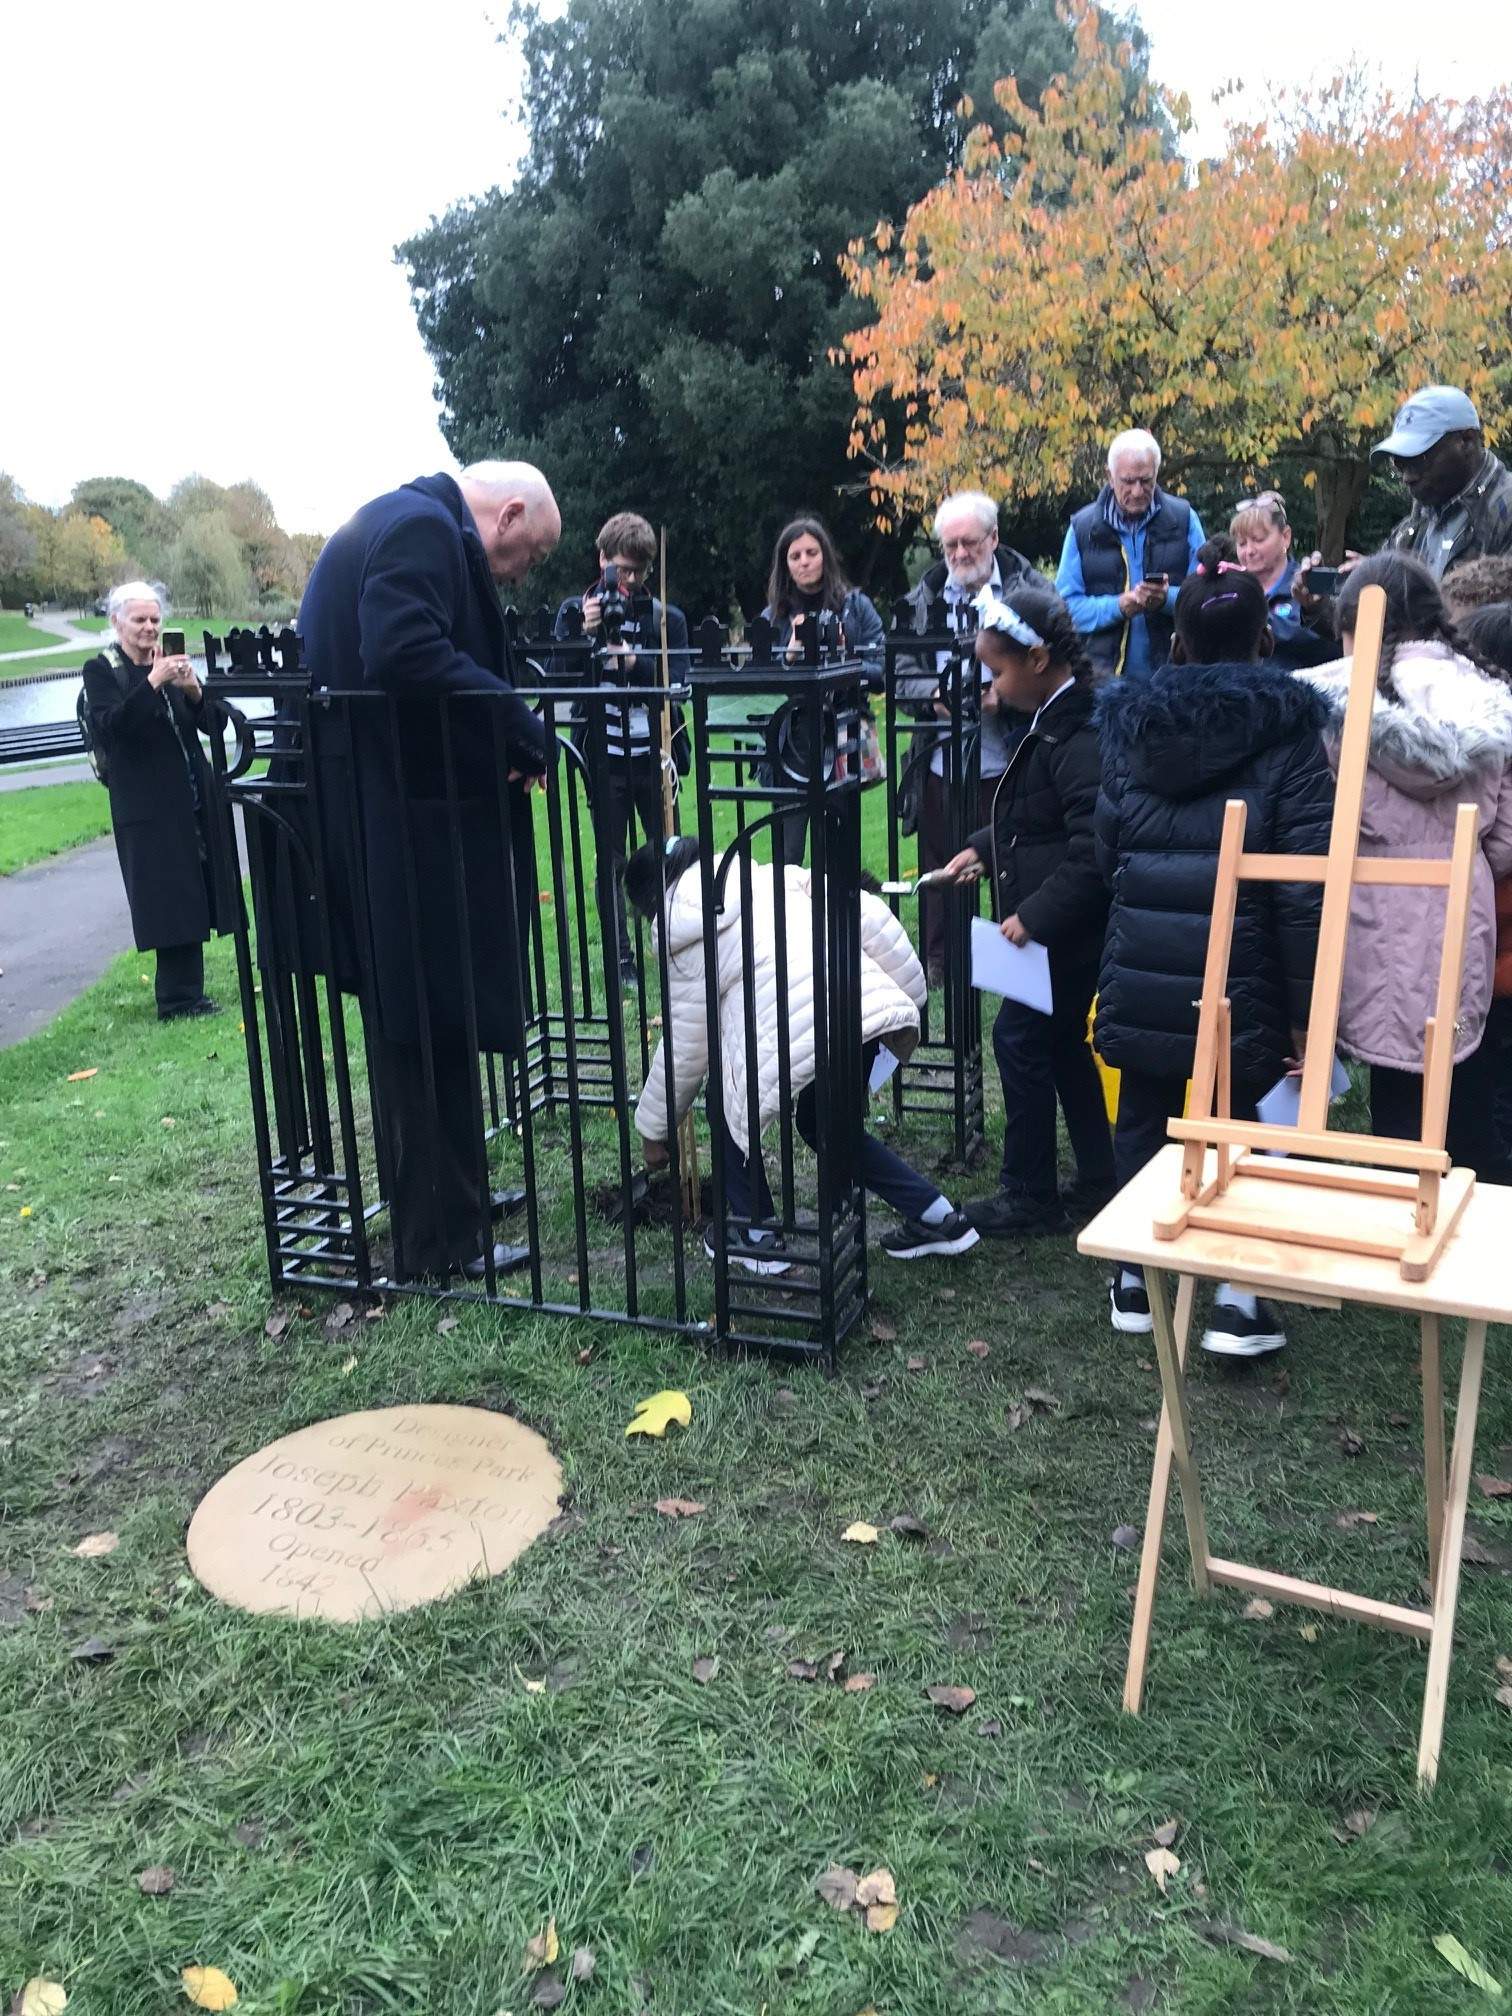 Children help plant the tree under the watchful eye of the Duke